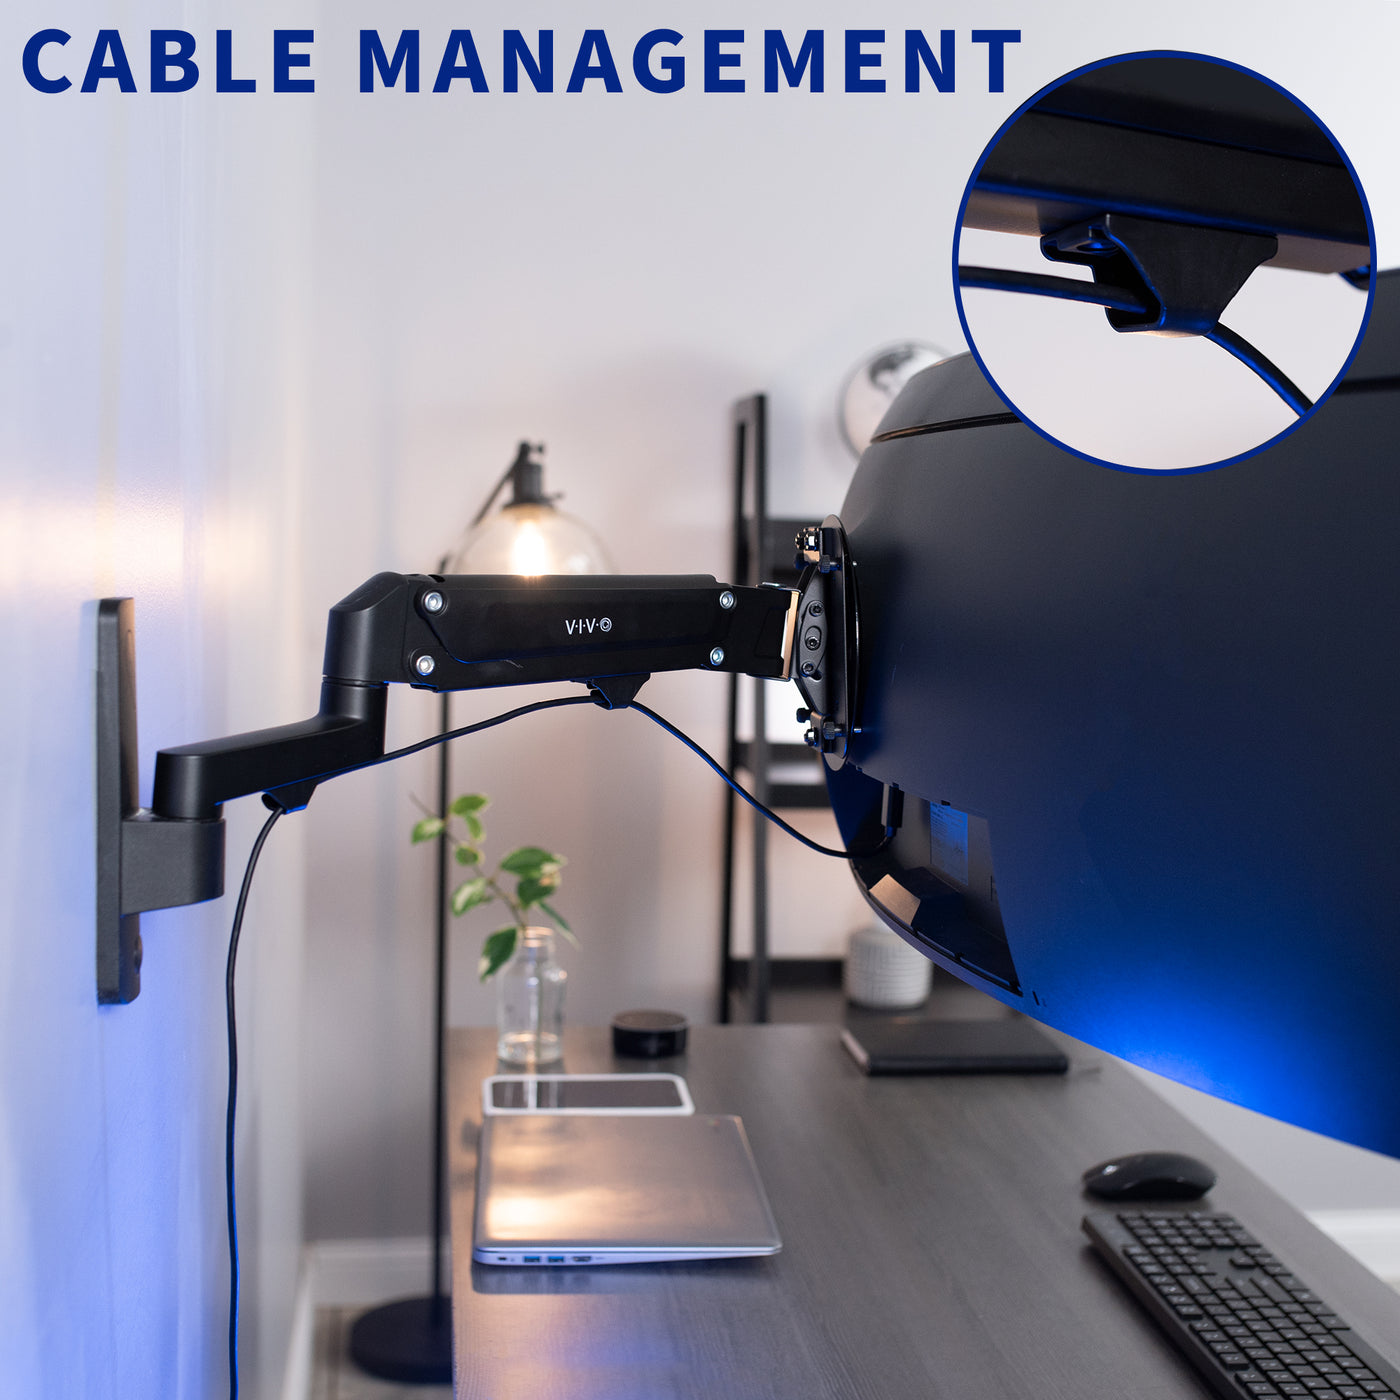 Dual Monitor Pneumatic Wall Mount for ergonomic viewing angles.